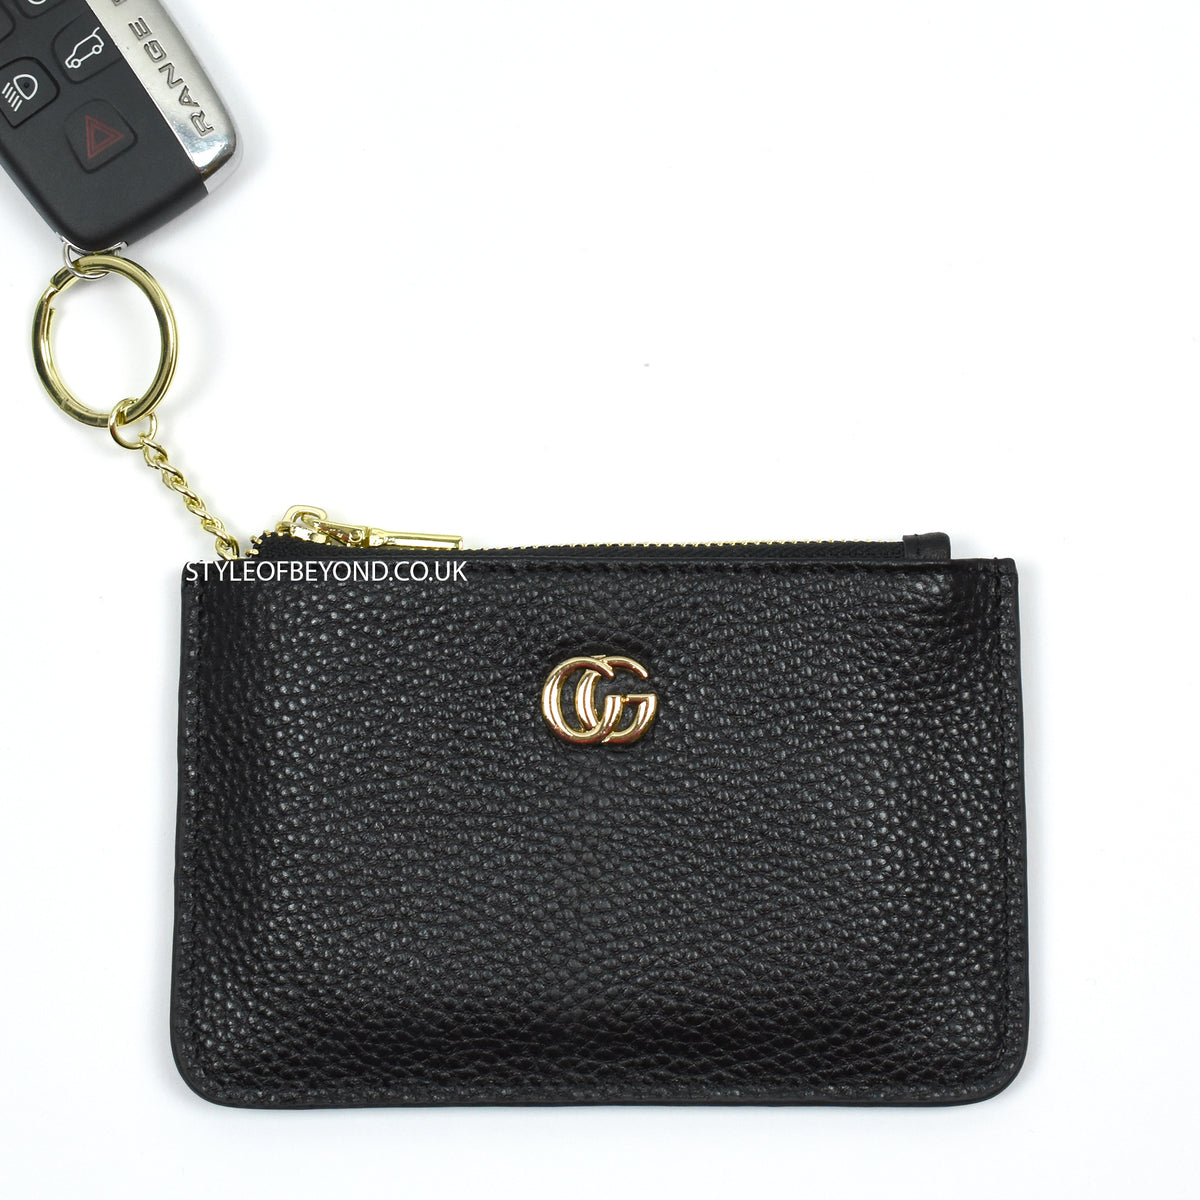 June Leather Gucci Inspired Key Pouch 